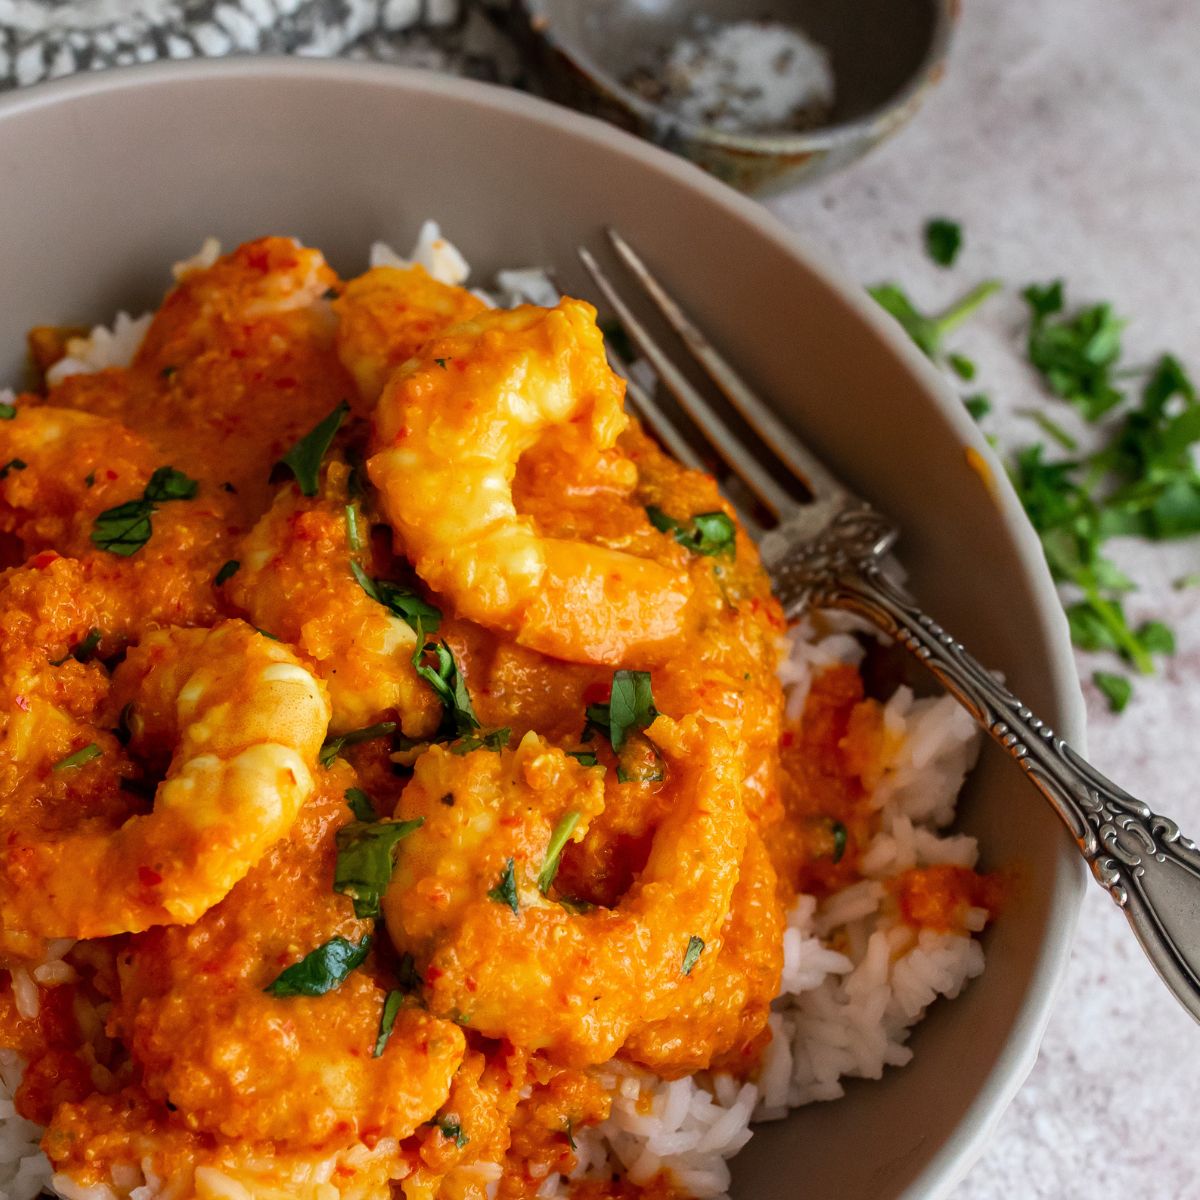 Coconut Shrimp Curry in a grey bowl.